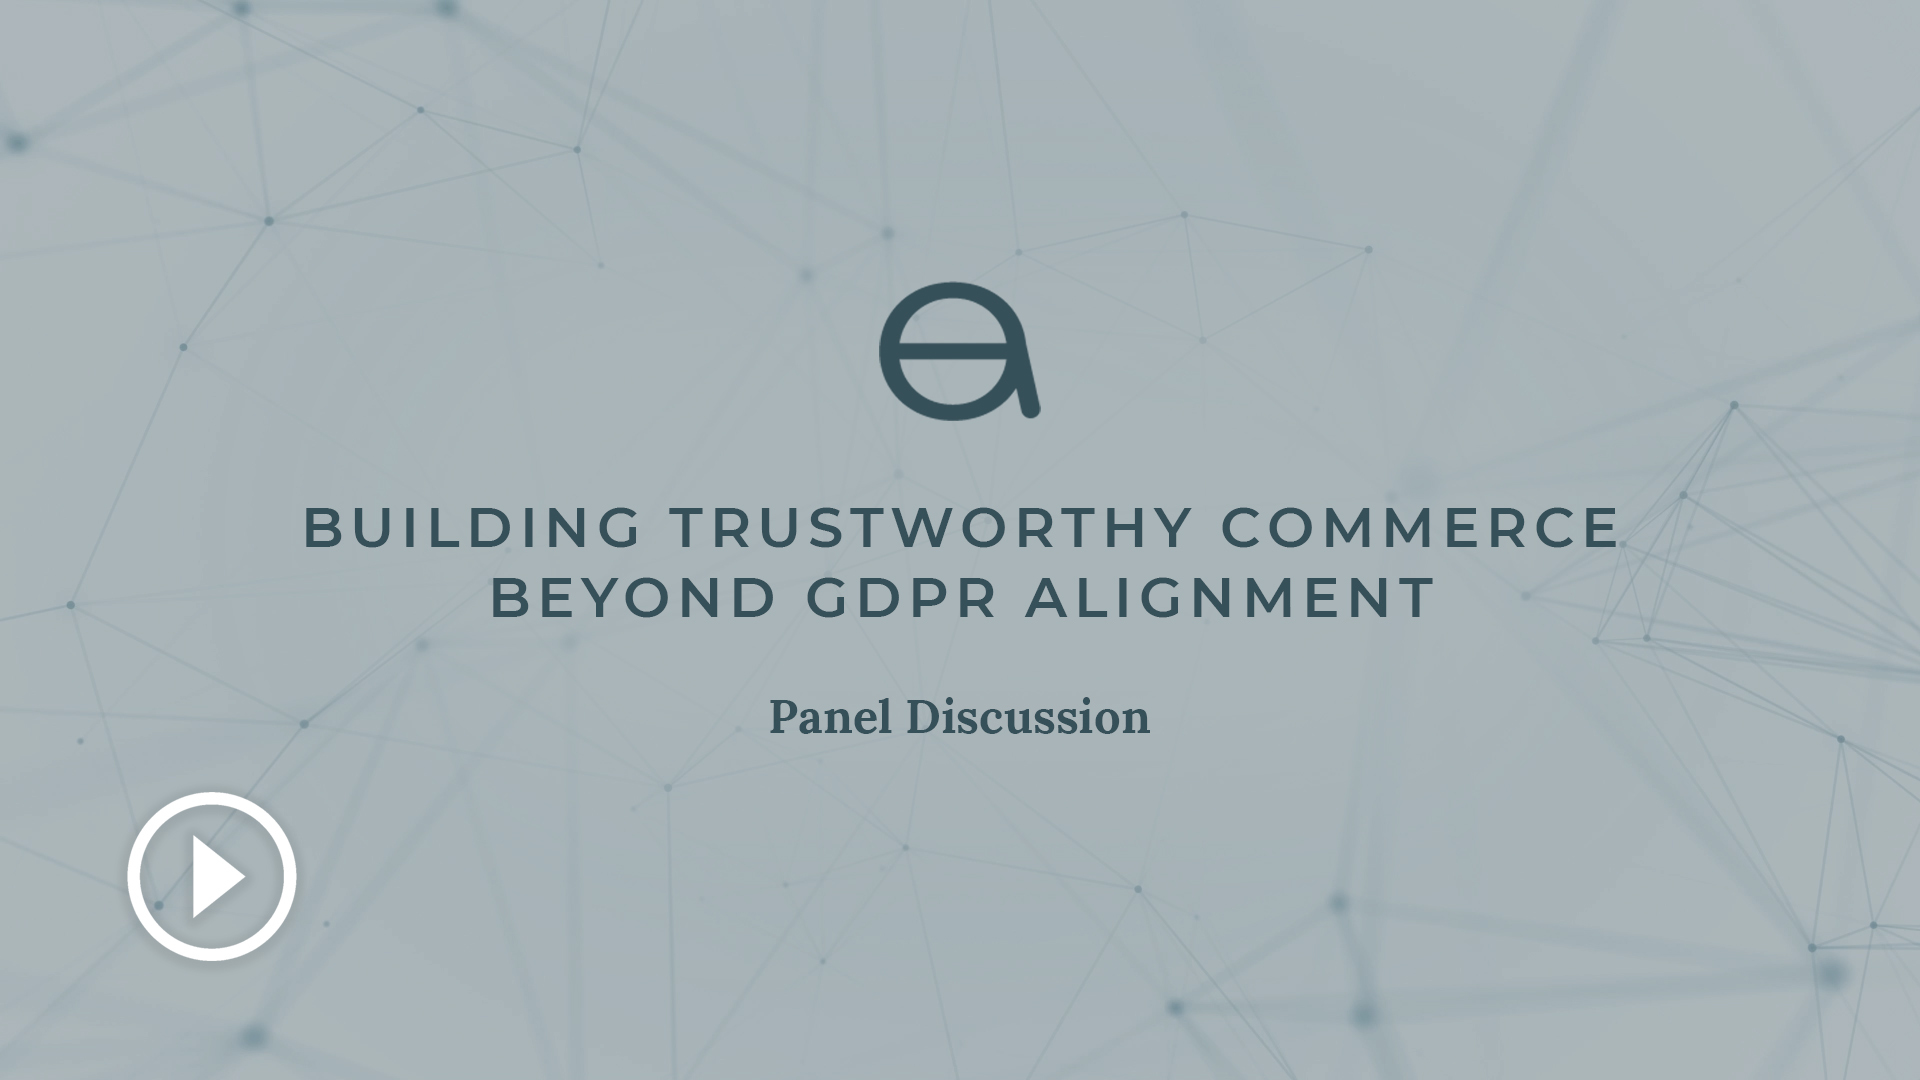 Building Trustworthy Commerce Panel Discussion Poster